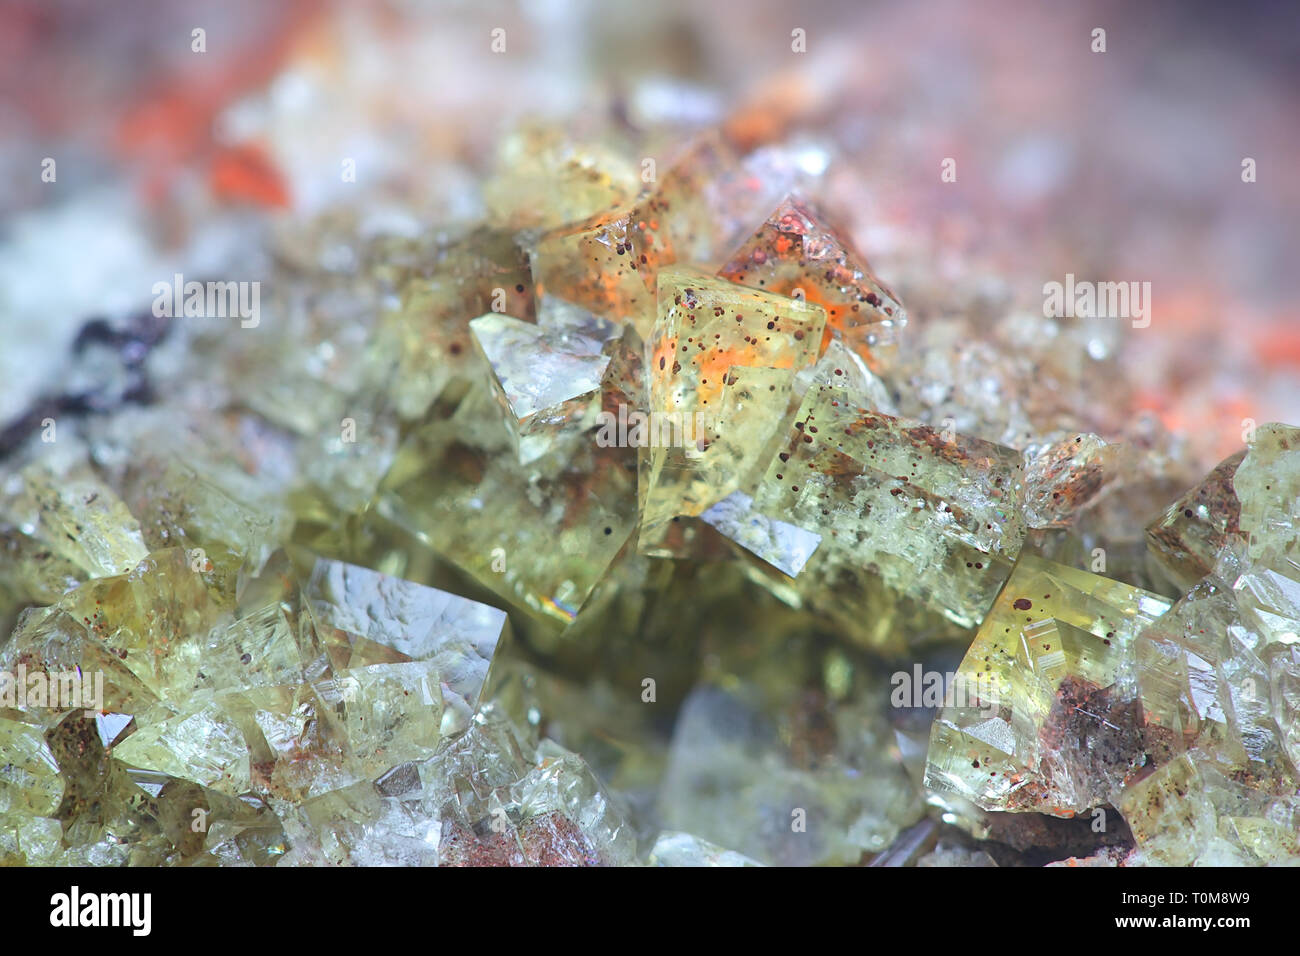 Crystals of fluorite with hematite inclusions from Illo calcite quarry in Finland Stock Photo